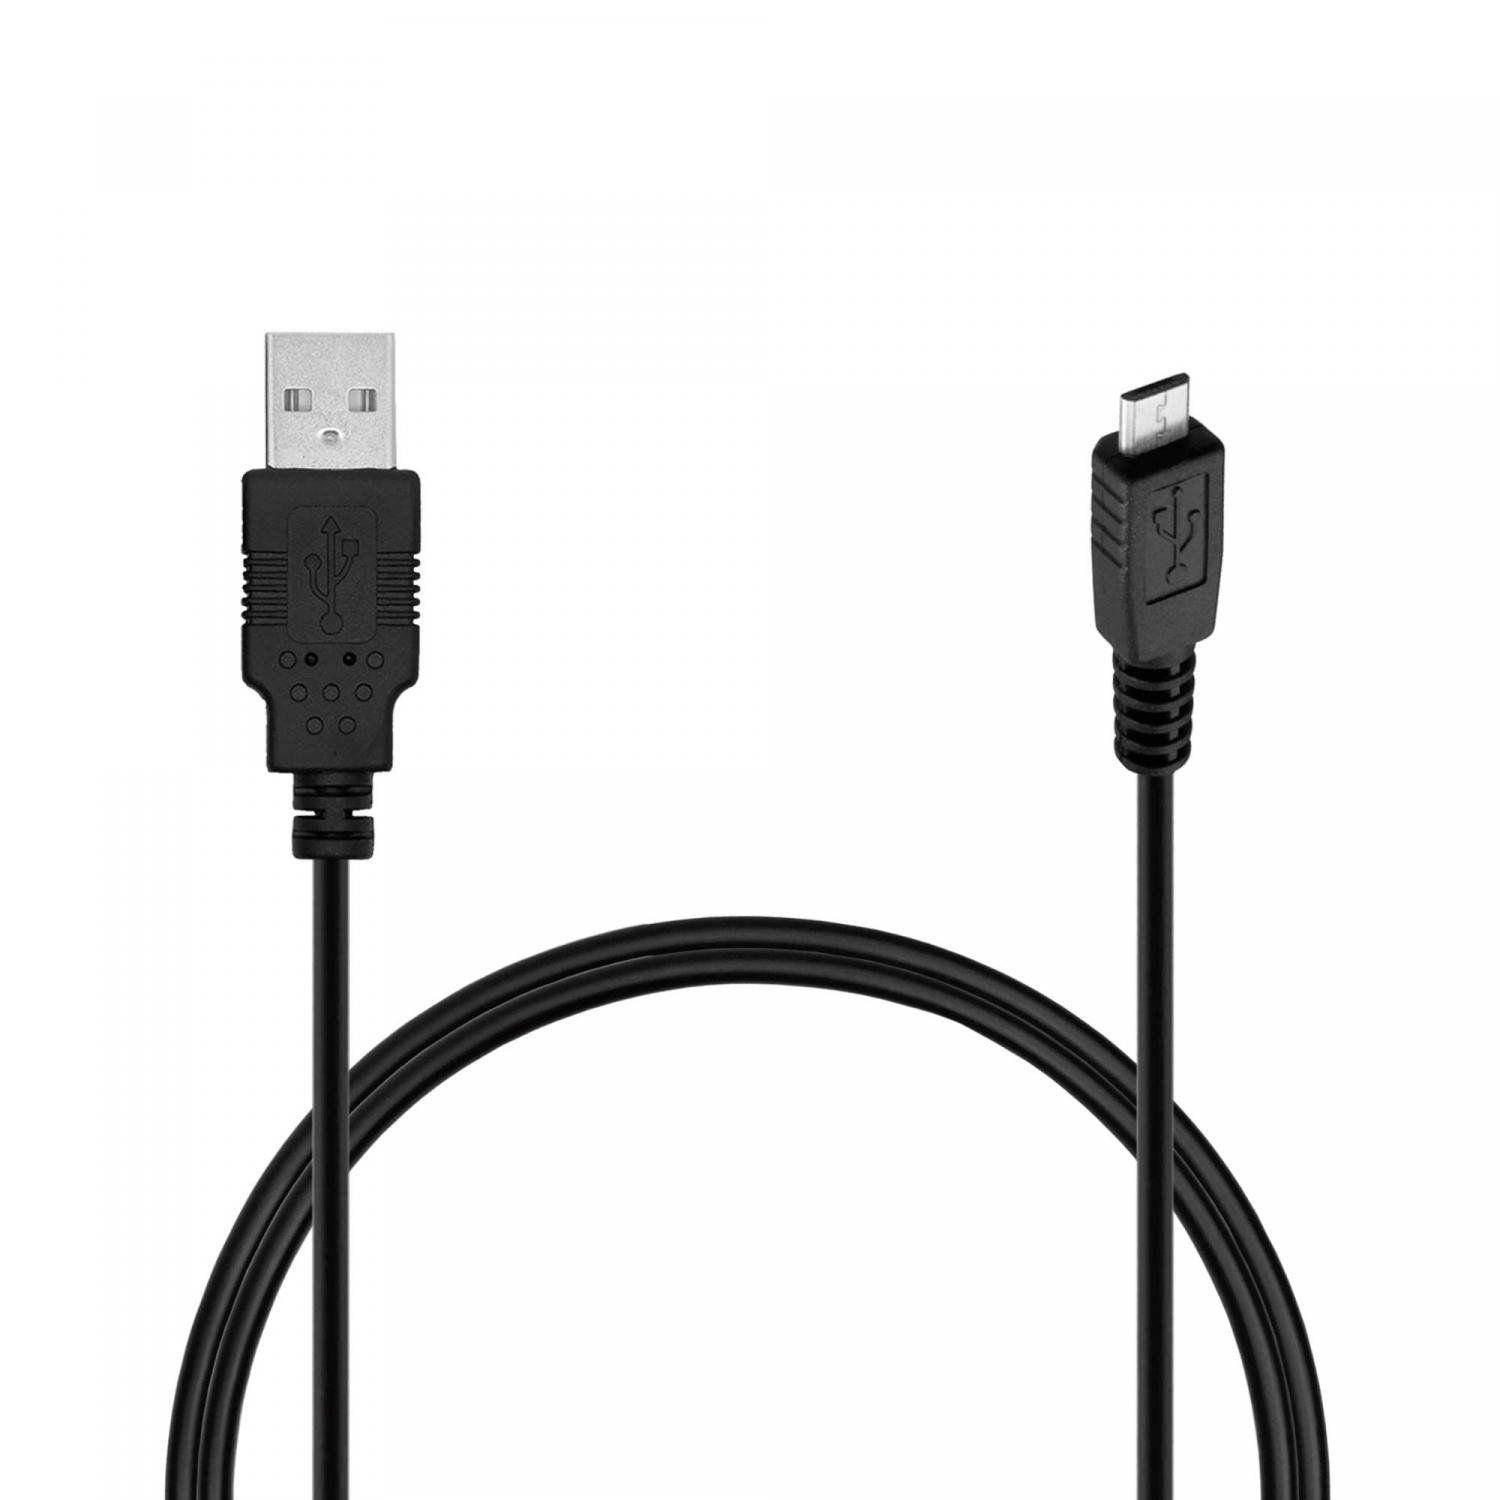 Abstraction Dancer Advertisement CABO USB 2.0 AM x MICRO USB 1,8m PC-USB1804 PLUS CABLE - No Magalu -  Magazine Luiza